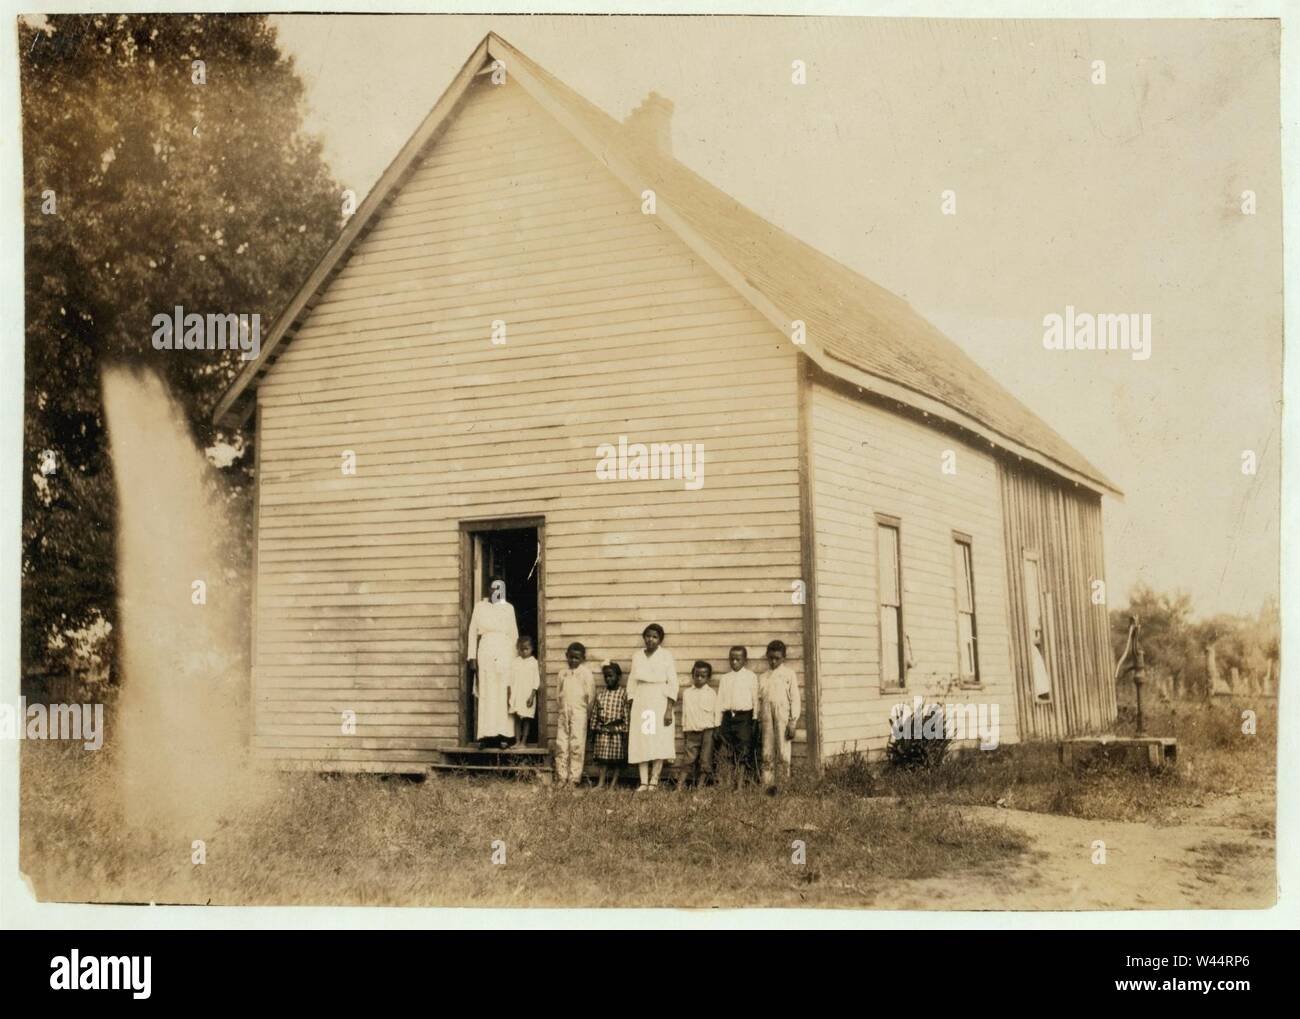 Colored School at Anthoston. Census 27, enrollment 12, attendance 7. Teacher expects 19 to be enrolled after work is over. 'Tobacco keeps them out and they are short of hands.' Ages of those Stock Photo